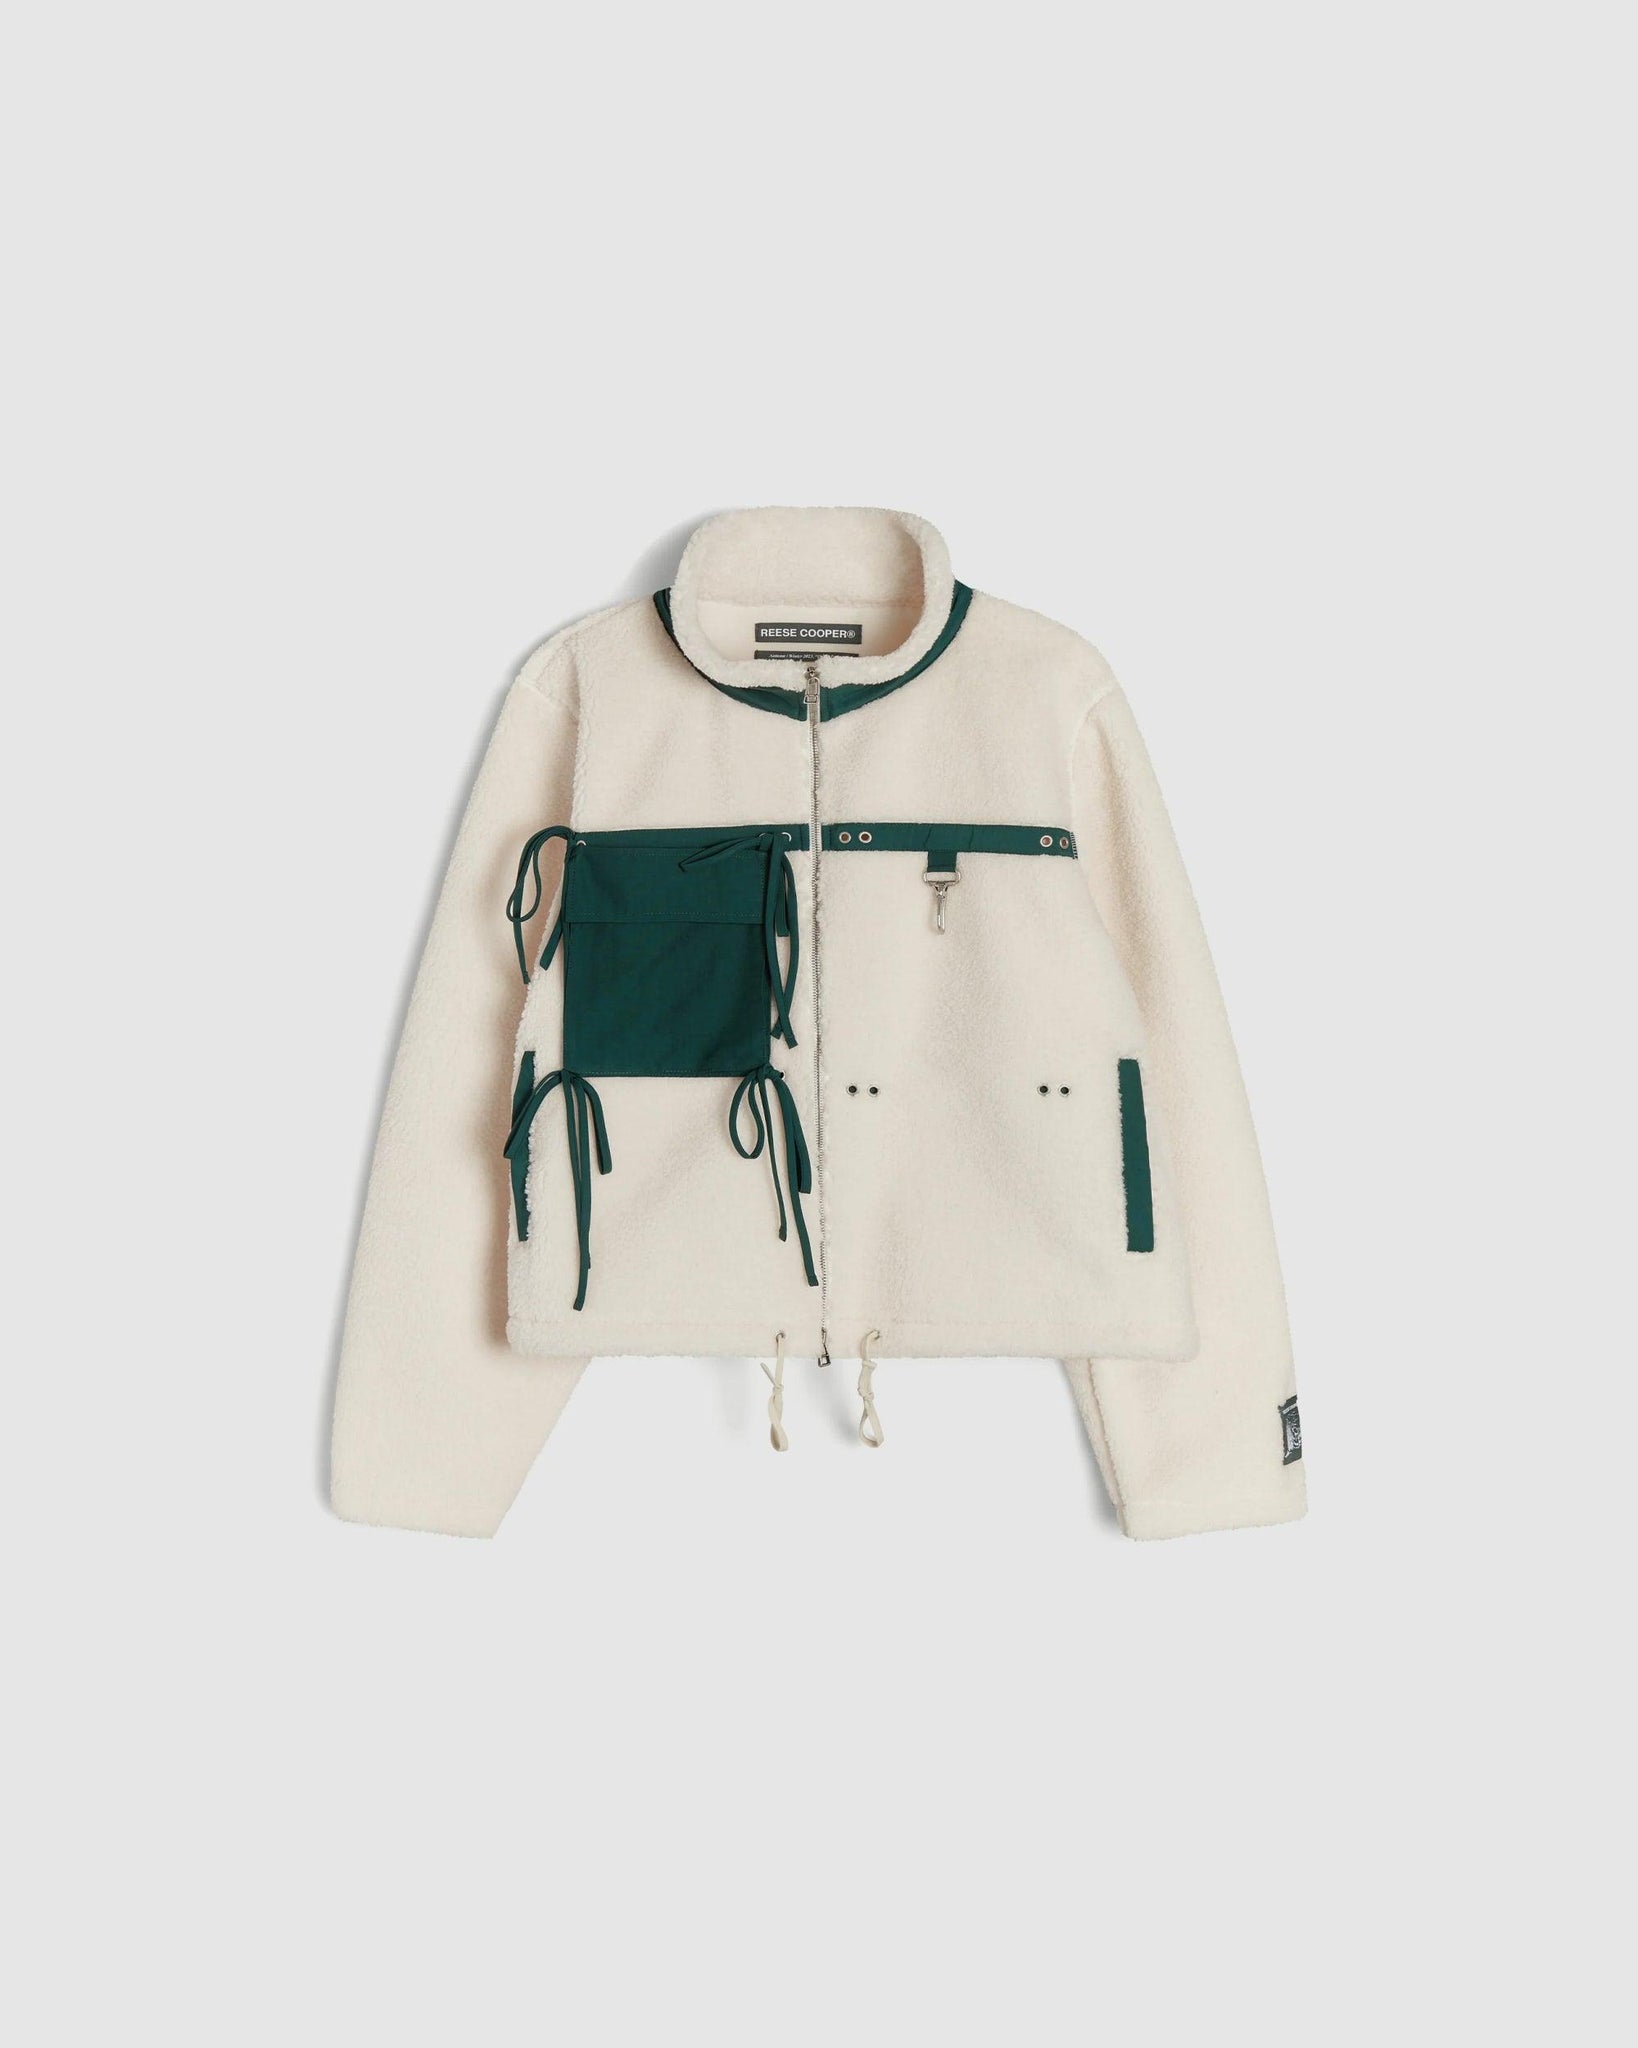 Modular Pocket Sherpa Fleece Jacket - {{ collection.title }} - Chinatown Country Club 